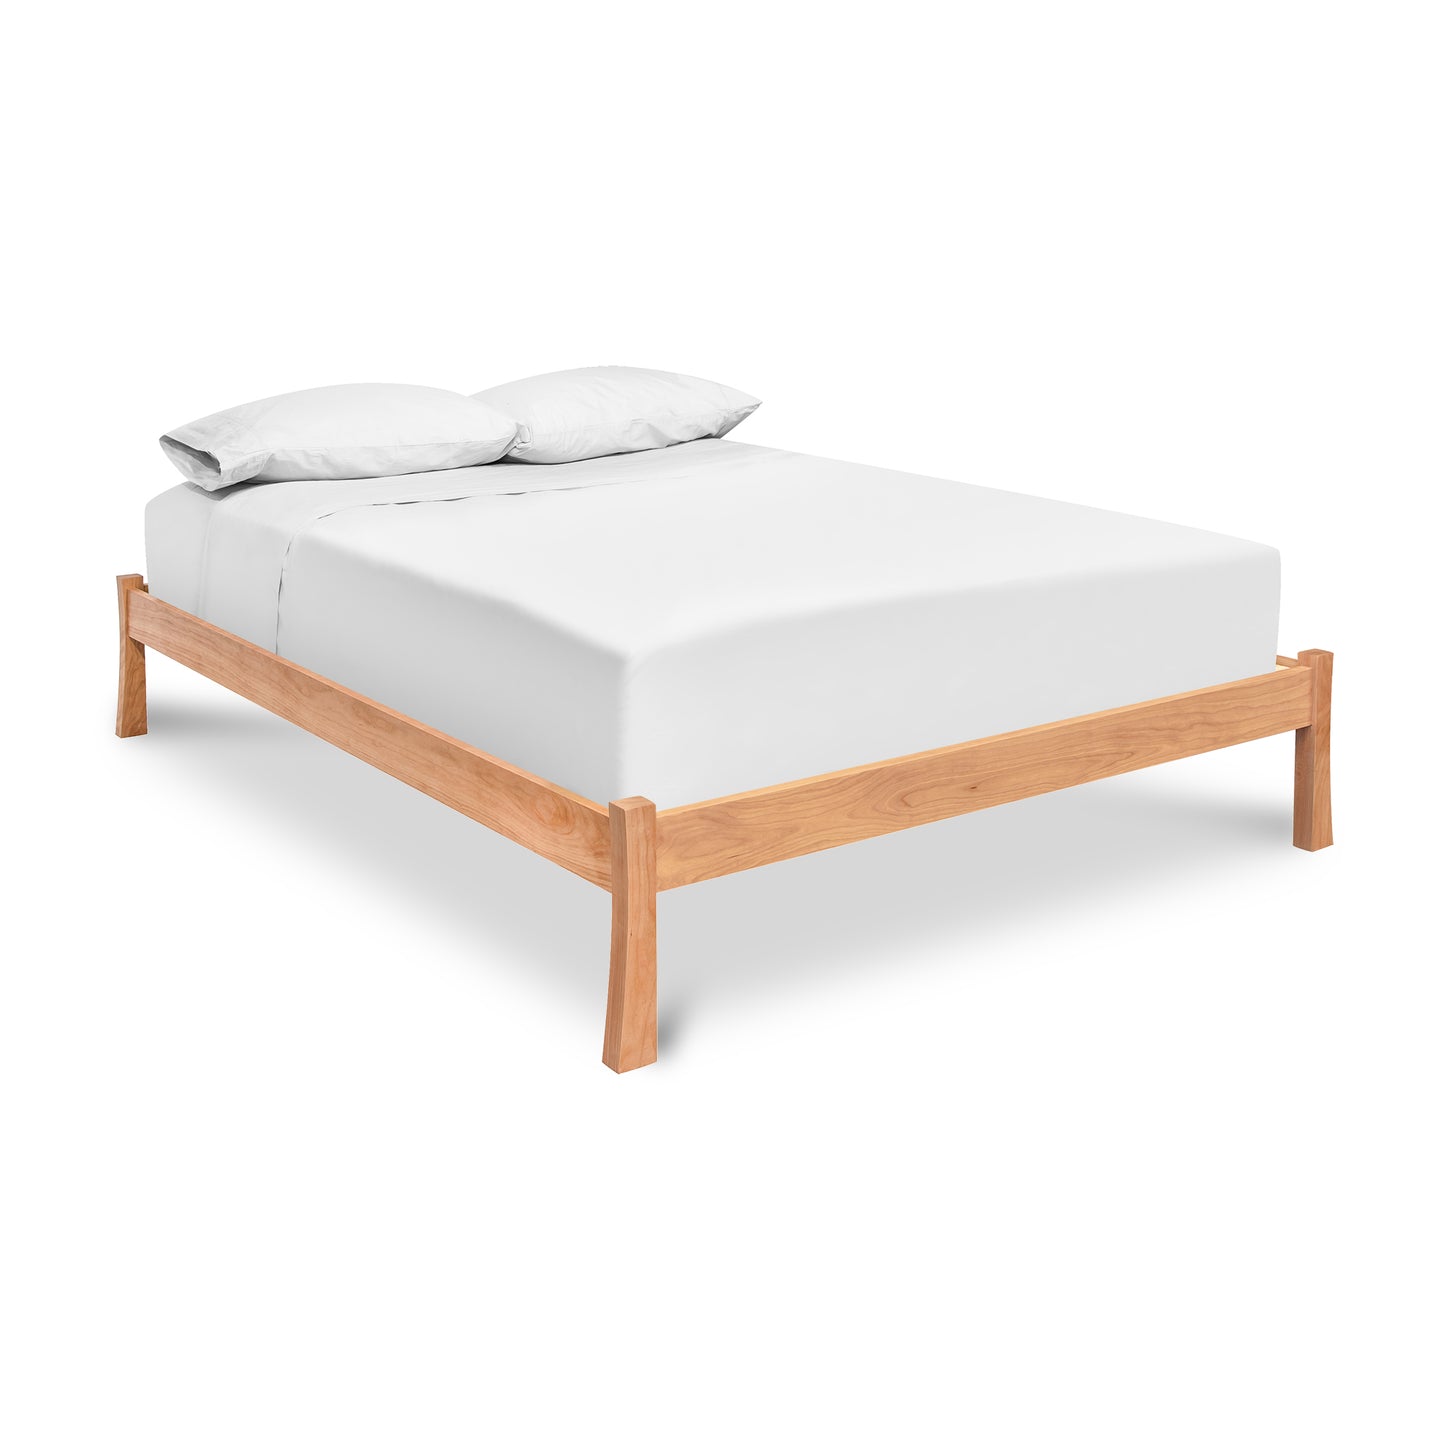 A minimalist wooden Contemporary Craftsman Studio-Style Platform Bed frame with white sheets, perfect for a contemporary bedroom. (Brand: Vermont Furniture Designs)